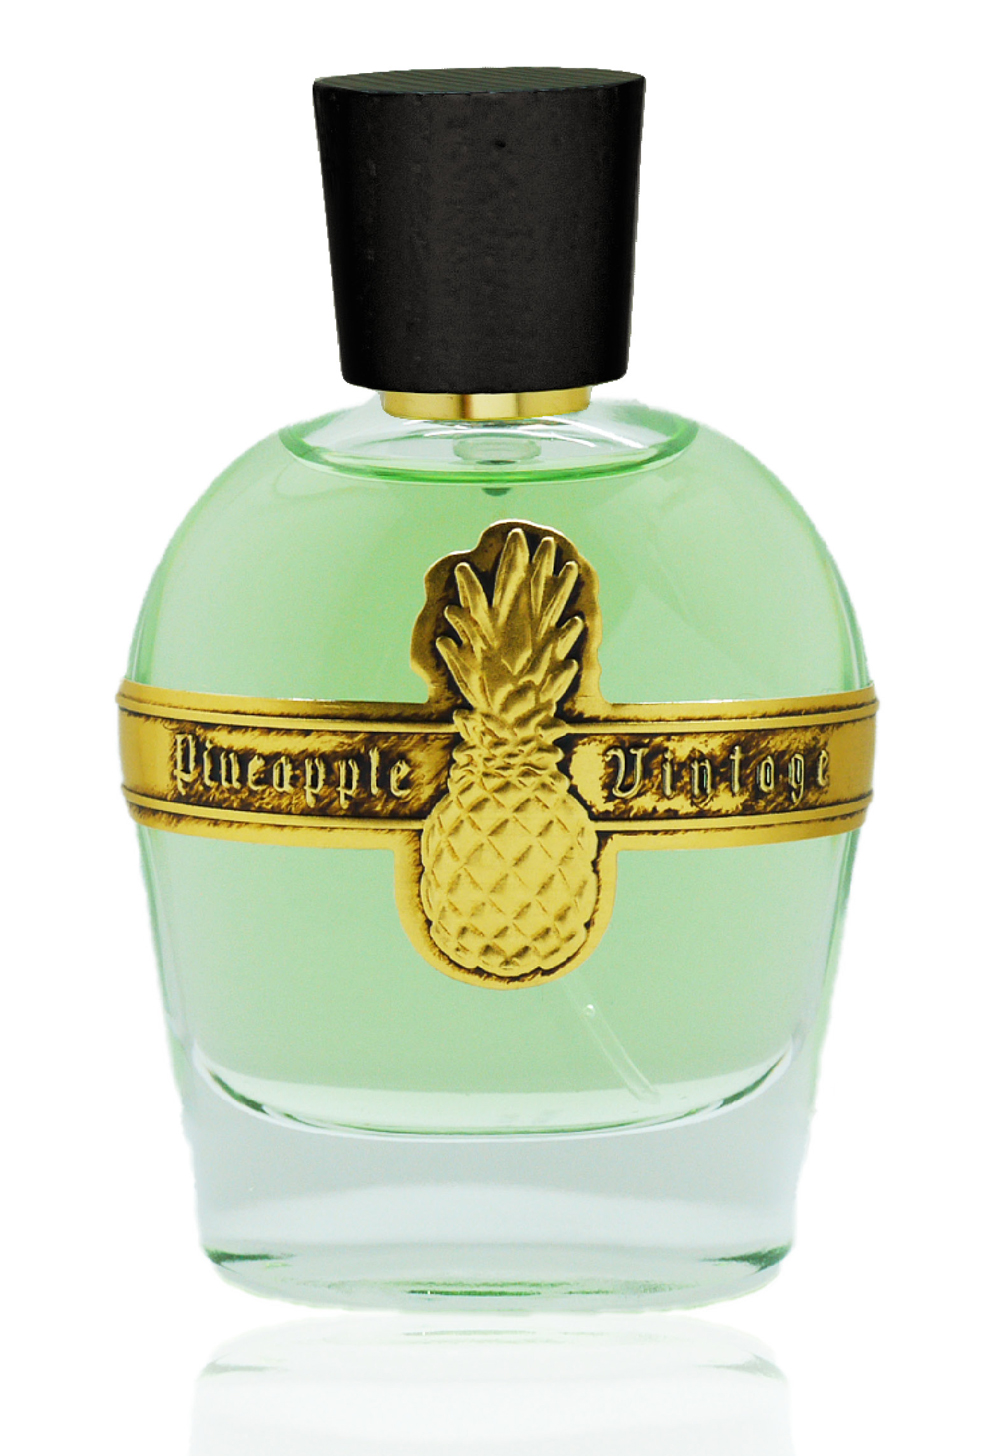 Emperor Extrait Parfums Vintage perfume - a fragrance for women and men ...